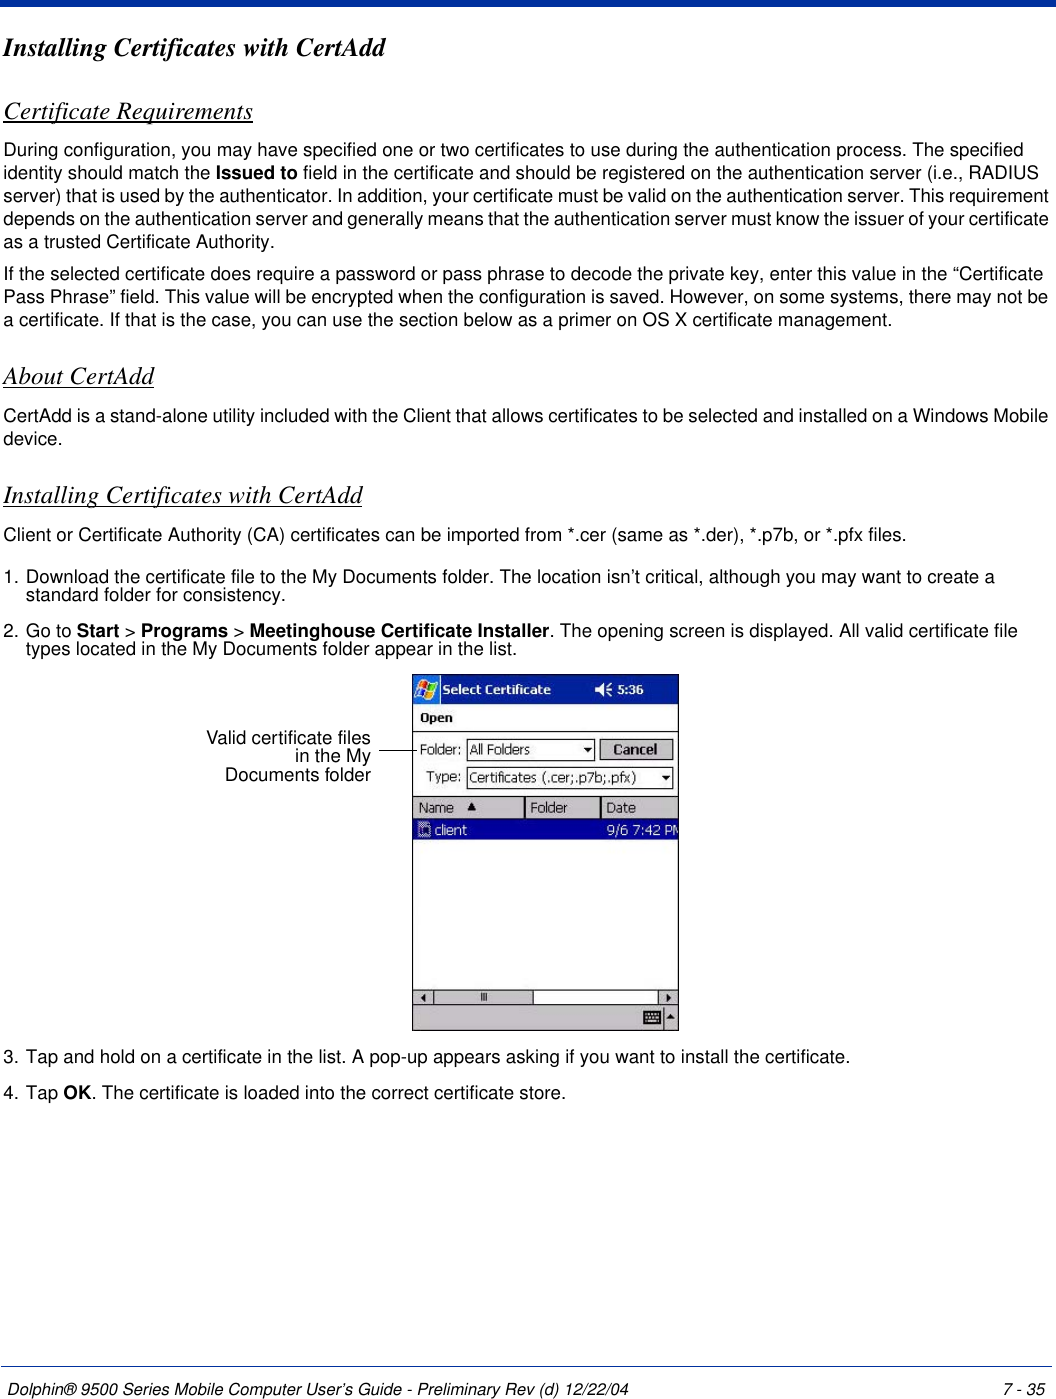 Dolphin® 9500 Series Mobile Computer User’s Guide - Preliminary Rev (d) 12/22/04 7 - 35Installing Certificates with CertAddCertificate RequirementsDuring configuration, you may have specified one or two certificates to use during the authentication process. The specified identity should match the Issued to field in the certificate and should be registered on the authentication server (i.e., RADIUS server) that is used by the authenticator. In addition, your certificate must be valid on the authentication server. This requirement depends on the authentication server and generally means that the authentication server must know the issuer of your certificate as a trusted Certificate Authority. If the selected certificate does require a password or pass phrase to decode the private key, enter this value in the “Certificate Pass Phrase” field. This value will be encrypted when the configuration is saved. However, on some systems, there may not be a certificate. If that is the case, you can use the section below as a primer on OS X certificate management.About CertAddCertAdd is a stand-alone utility included with the Client that allows certificates to be selected and installed on a Windows Mobile device.   Installing Certificates with CertAddClient or Certificate Authority (CA) certificates can be imported from *.cer (same as *.der), *.p7b, or *.pfx files.1. Download the certificate file to the My Documents folder. The location isn’t critical, although you may want to create a standard folder for consistency.2. Go to Start &gt; Programs &gt; Meetinghouse Certificate Installer. The opening screen is displayed. All valid certificate file types located in the My Documents folder appear in the list. 3. Tap and hold on a certificate in the list. A pop-up appears asking if you want to install the certificate.4. Tap OK. The certificate is loaded into the correct certificate store.Valid certificate files in the My Documents folder 